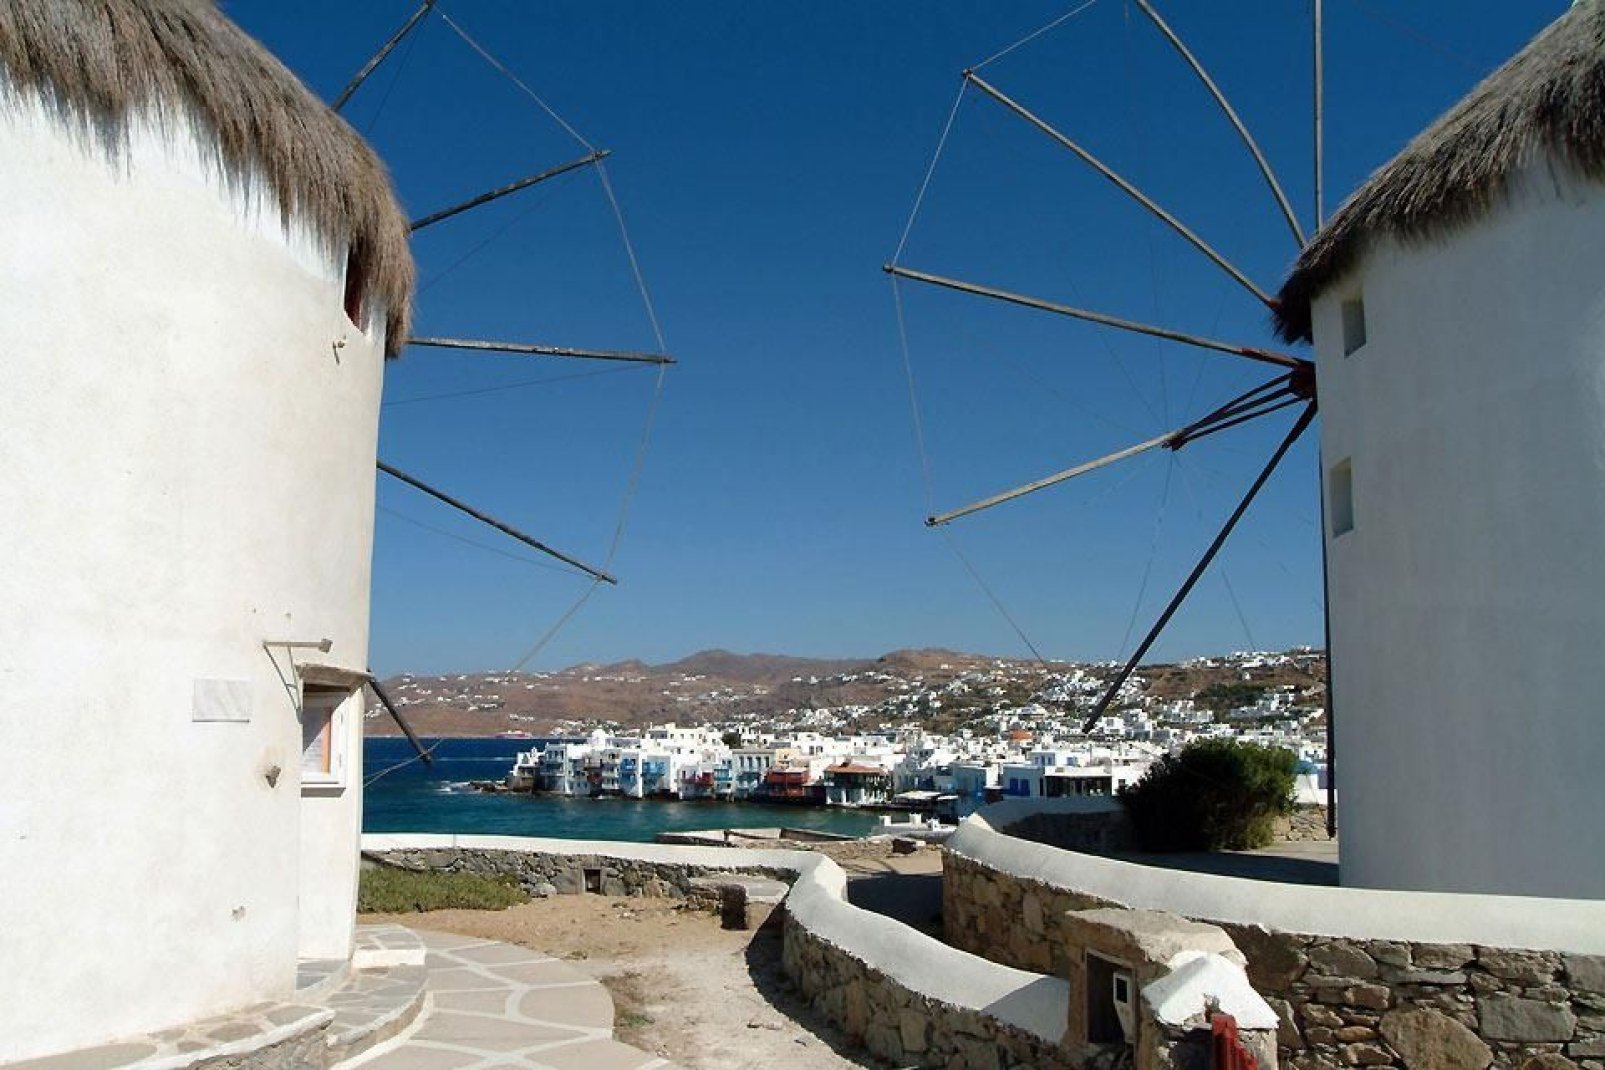 From the top of a rocky promontory, the windmills of Mykonos dominate the city.